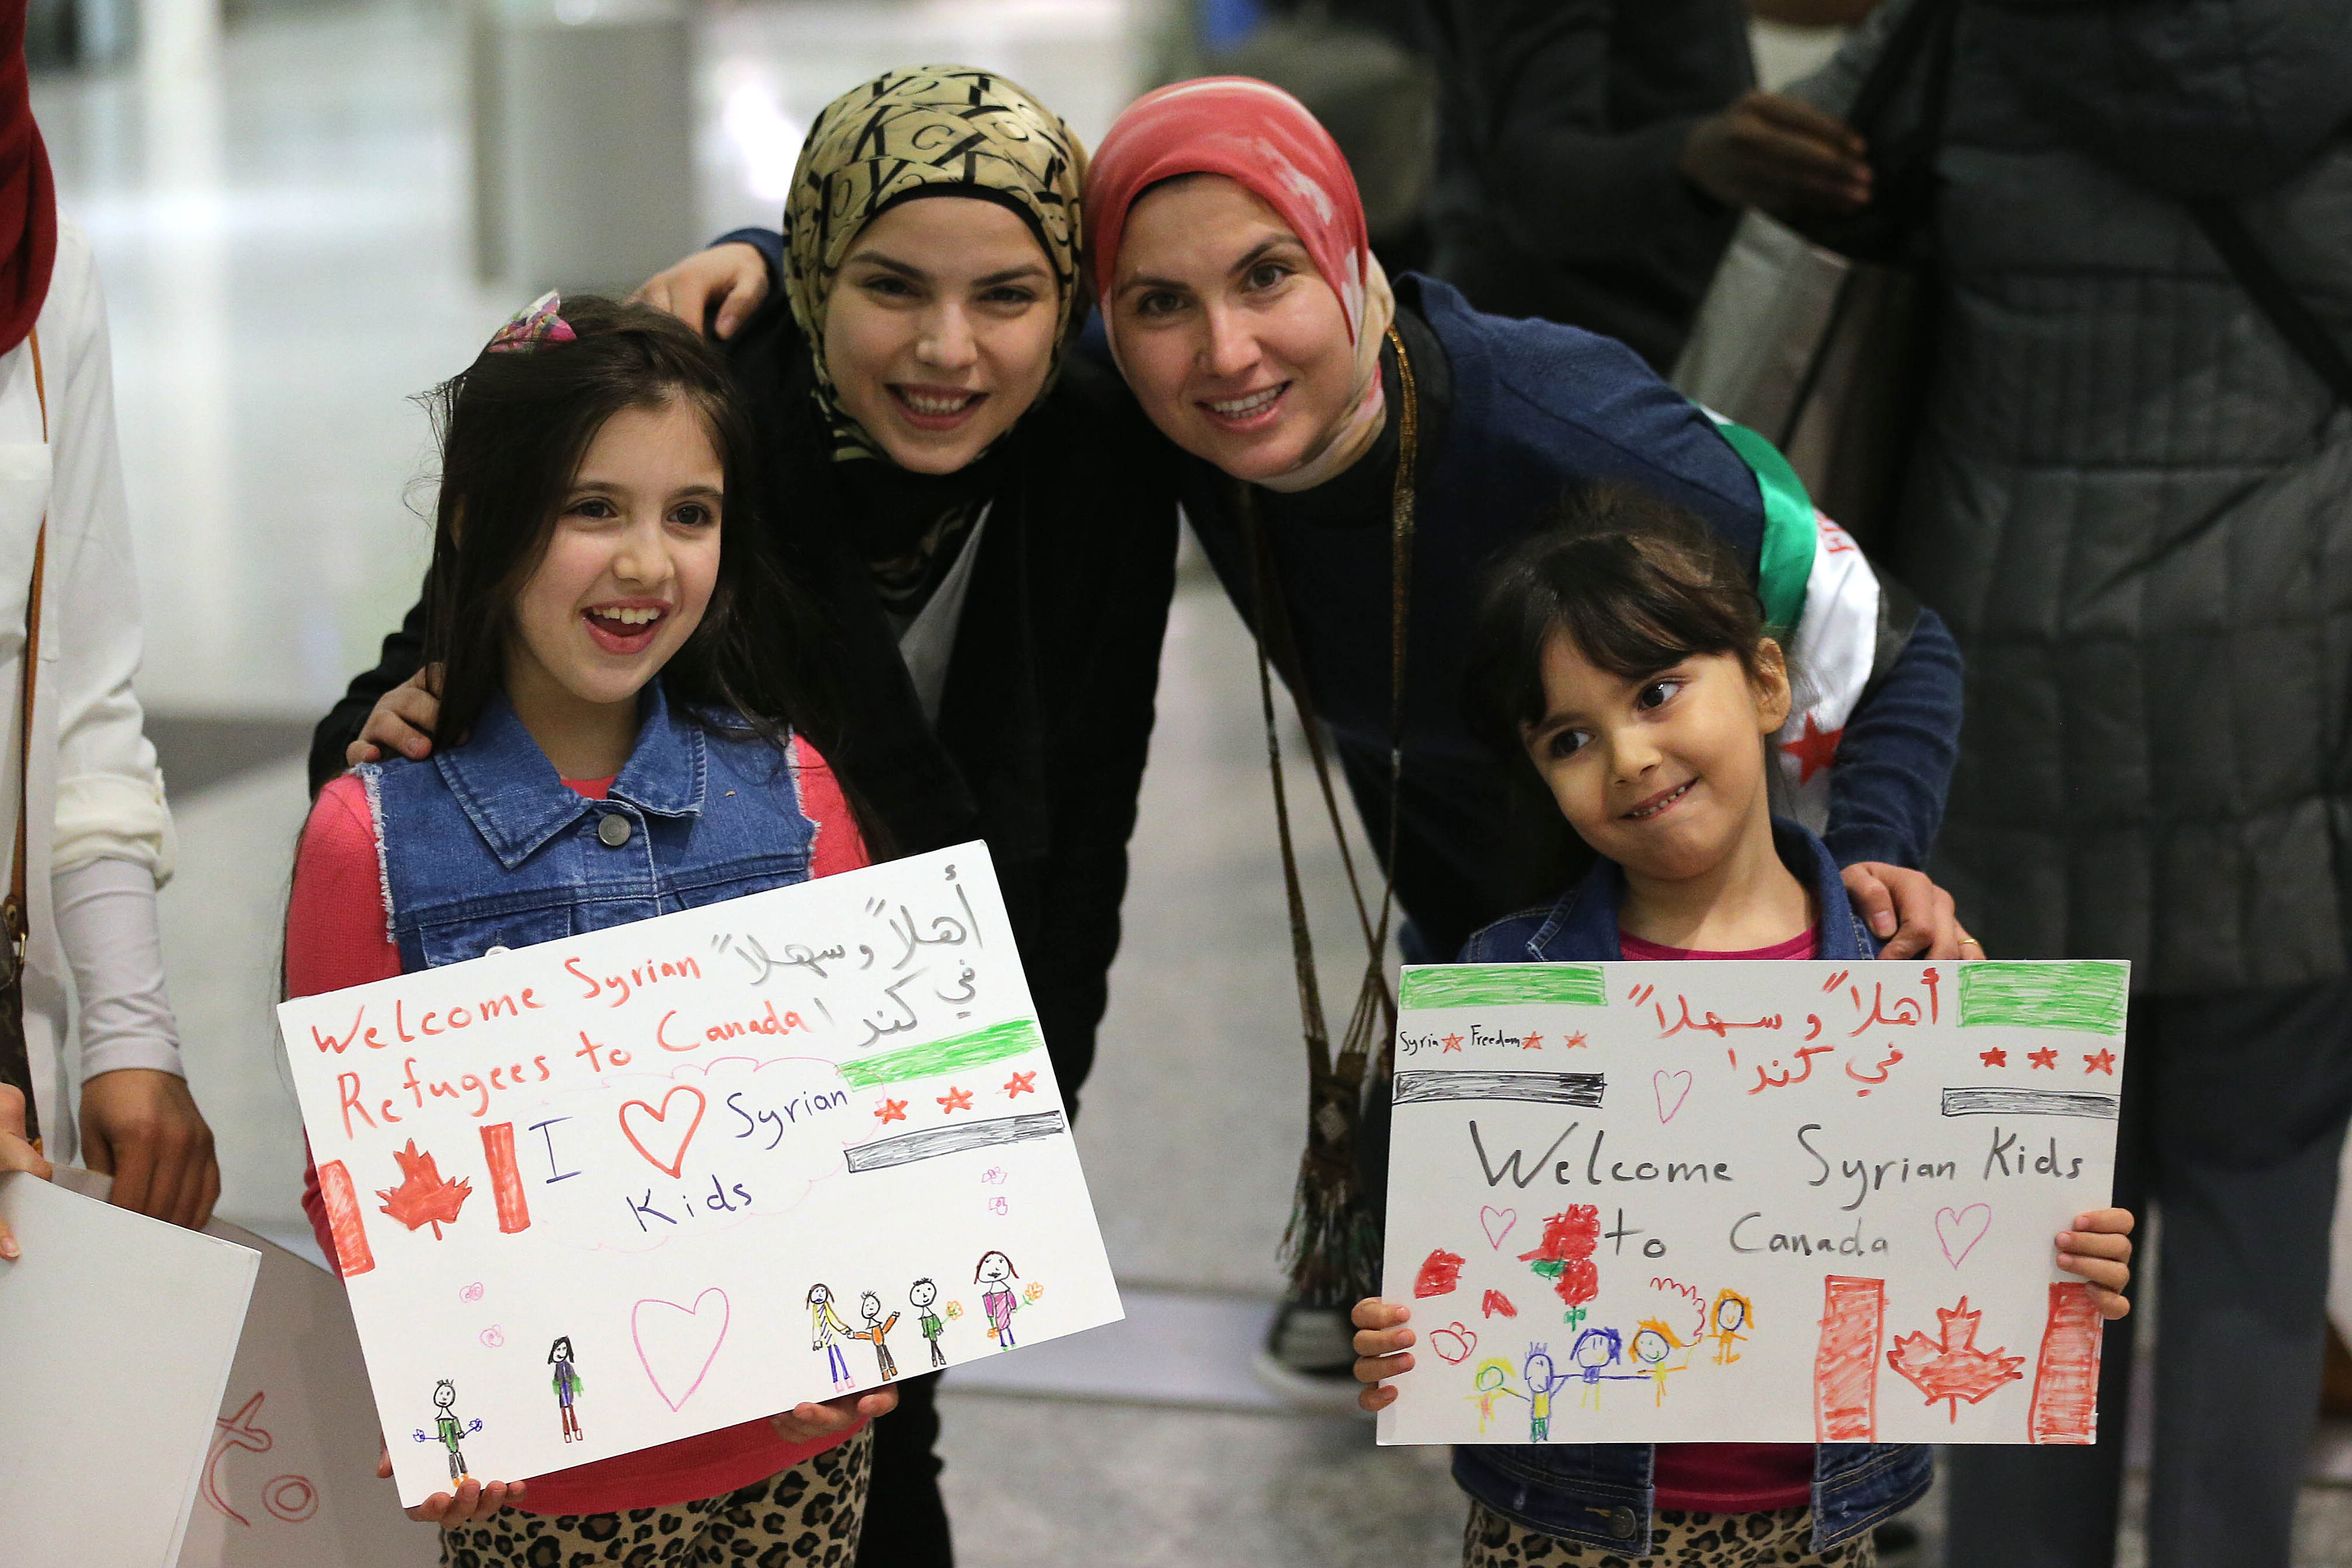 Maryam and Nore Kasmeih wait for Syrian refugees at the airport on Dec. 10, 2015. Their mother came to Canada 15 years ago and their family that was in Syria fled to Turkey. (Steve Russell—Toronto Star/Getty Images)